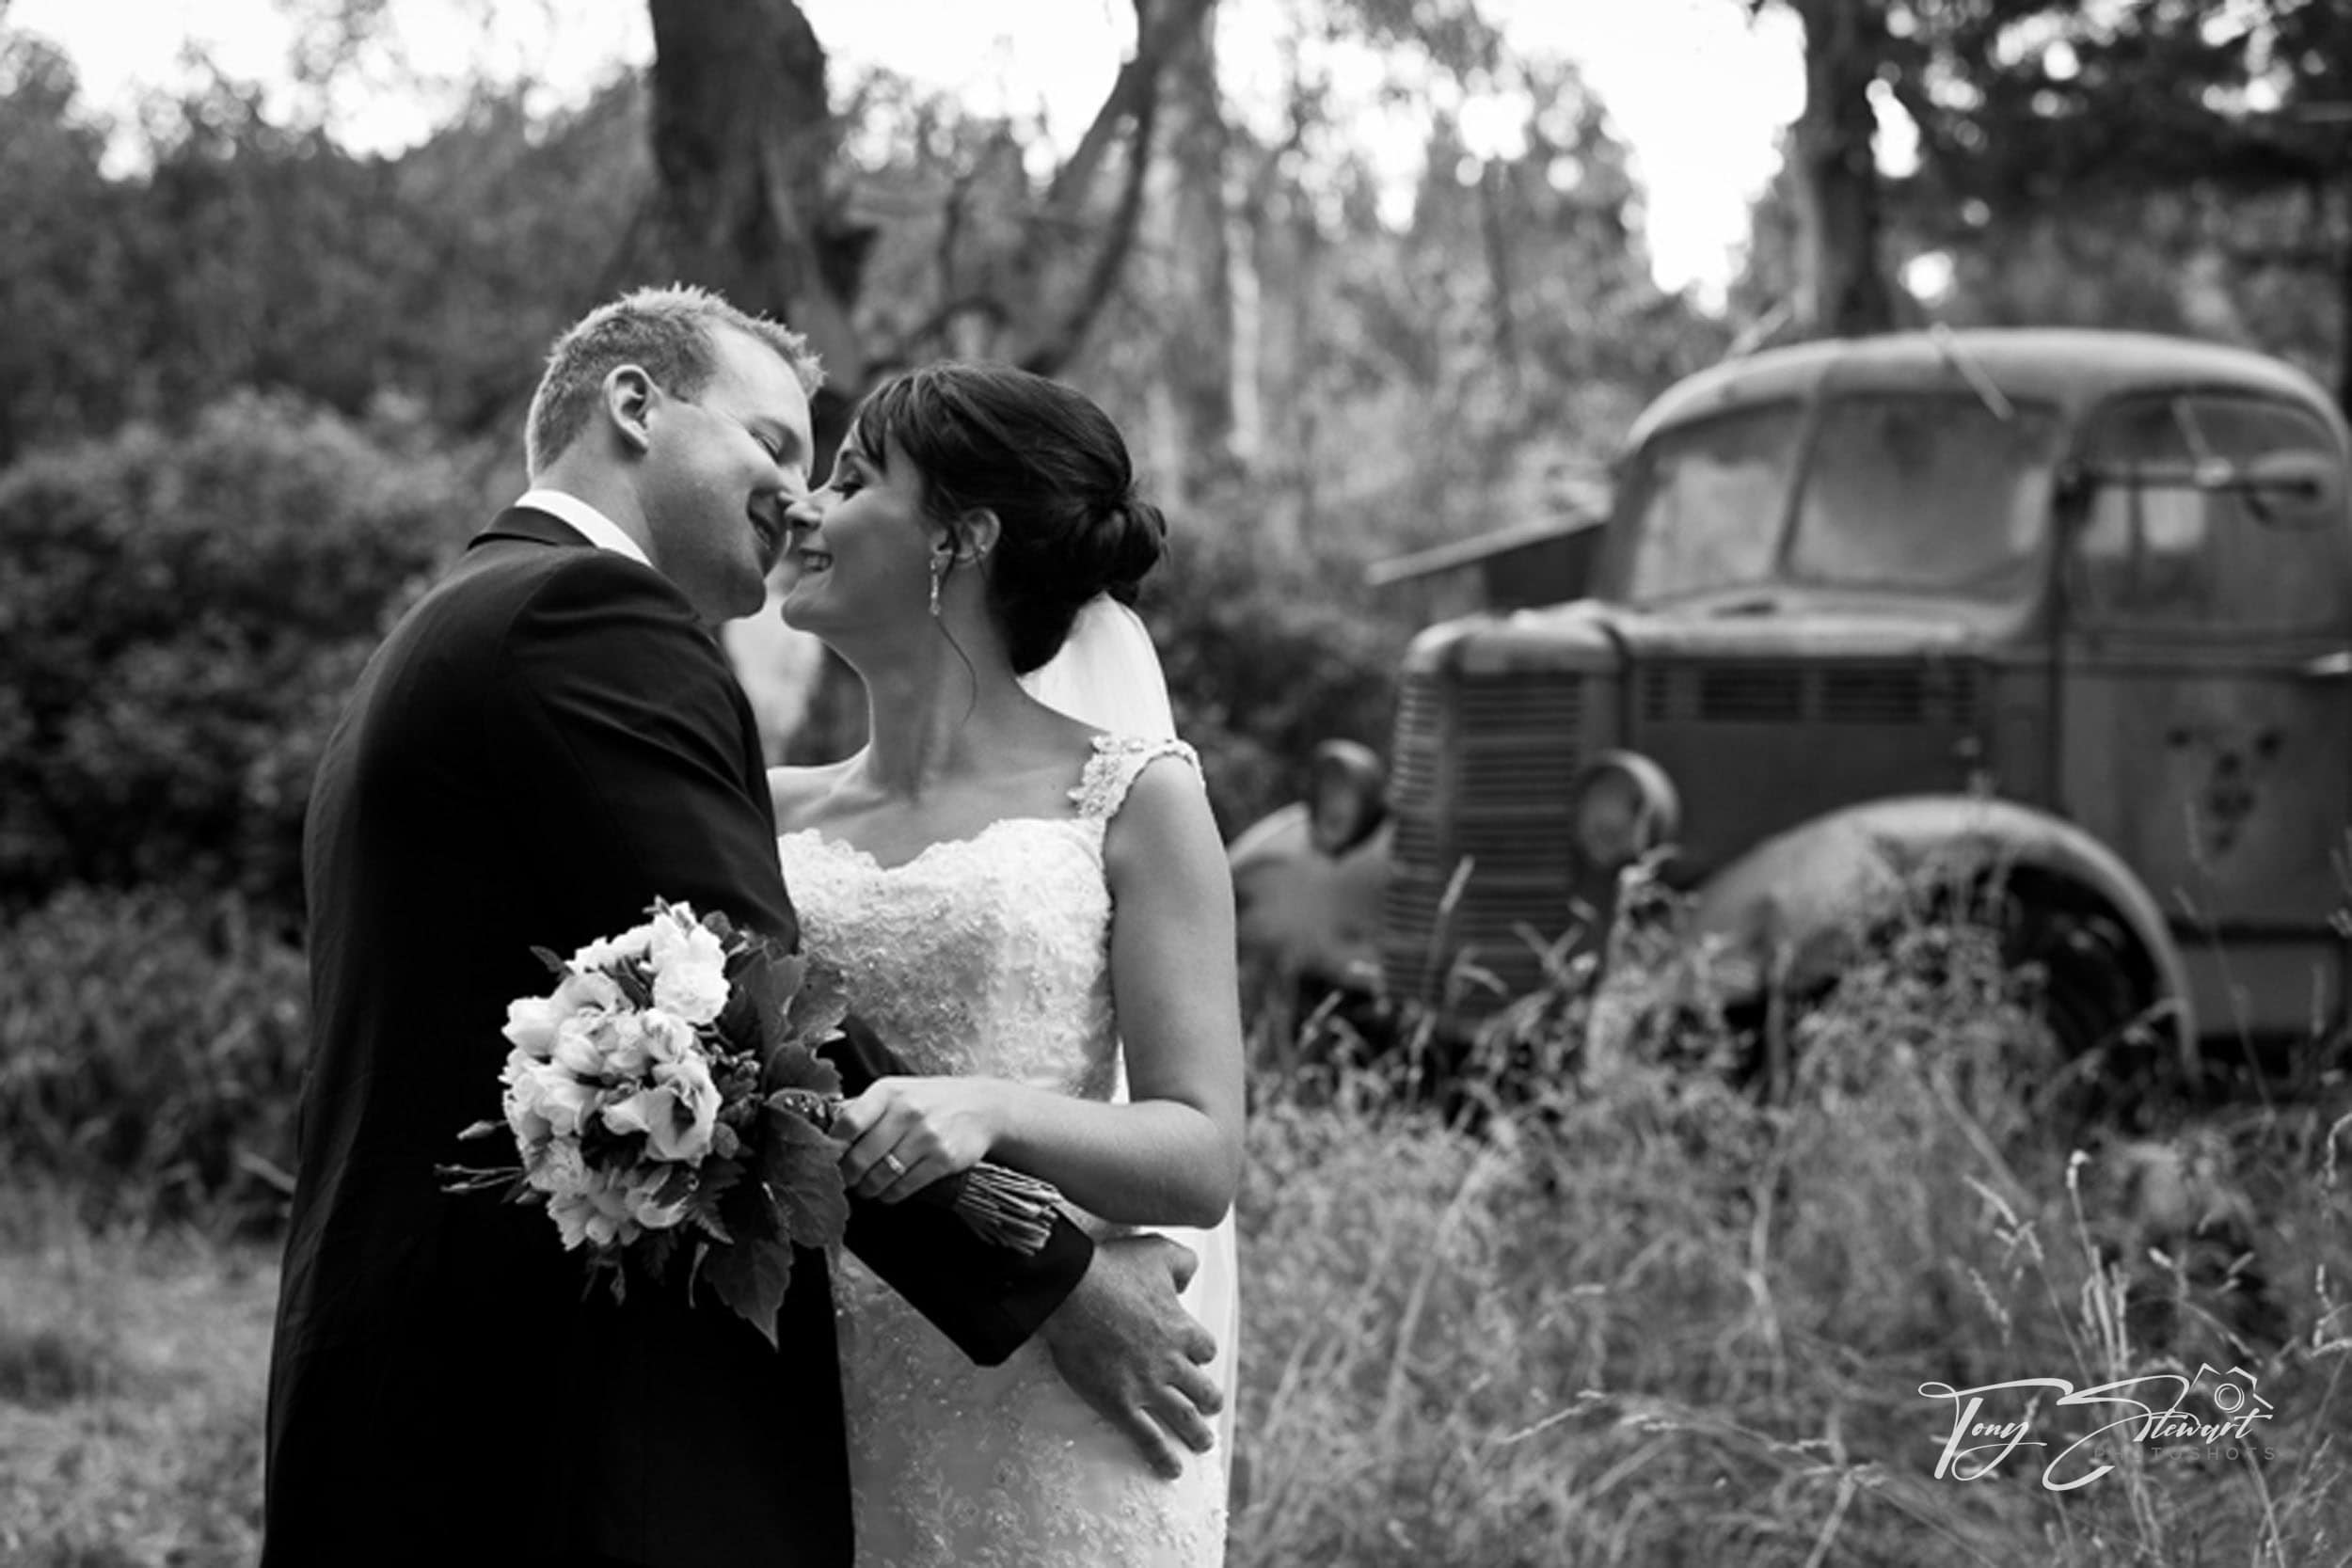 A newly wedded couple share a kiss in front of a rusted truck, at Trents Estate Vineyard.